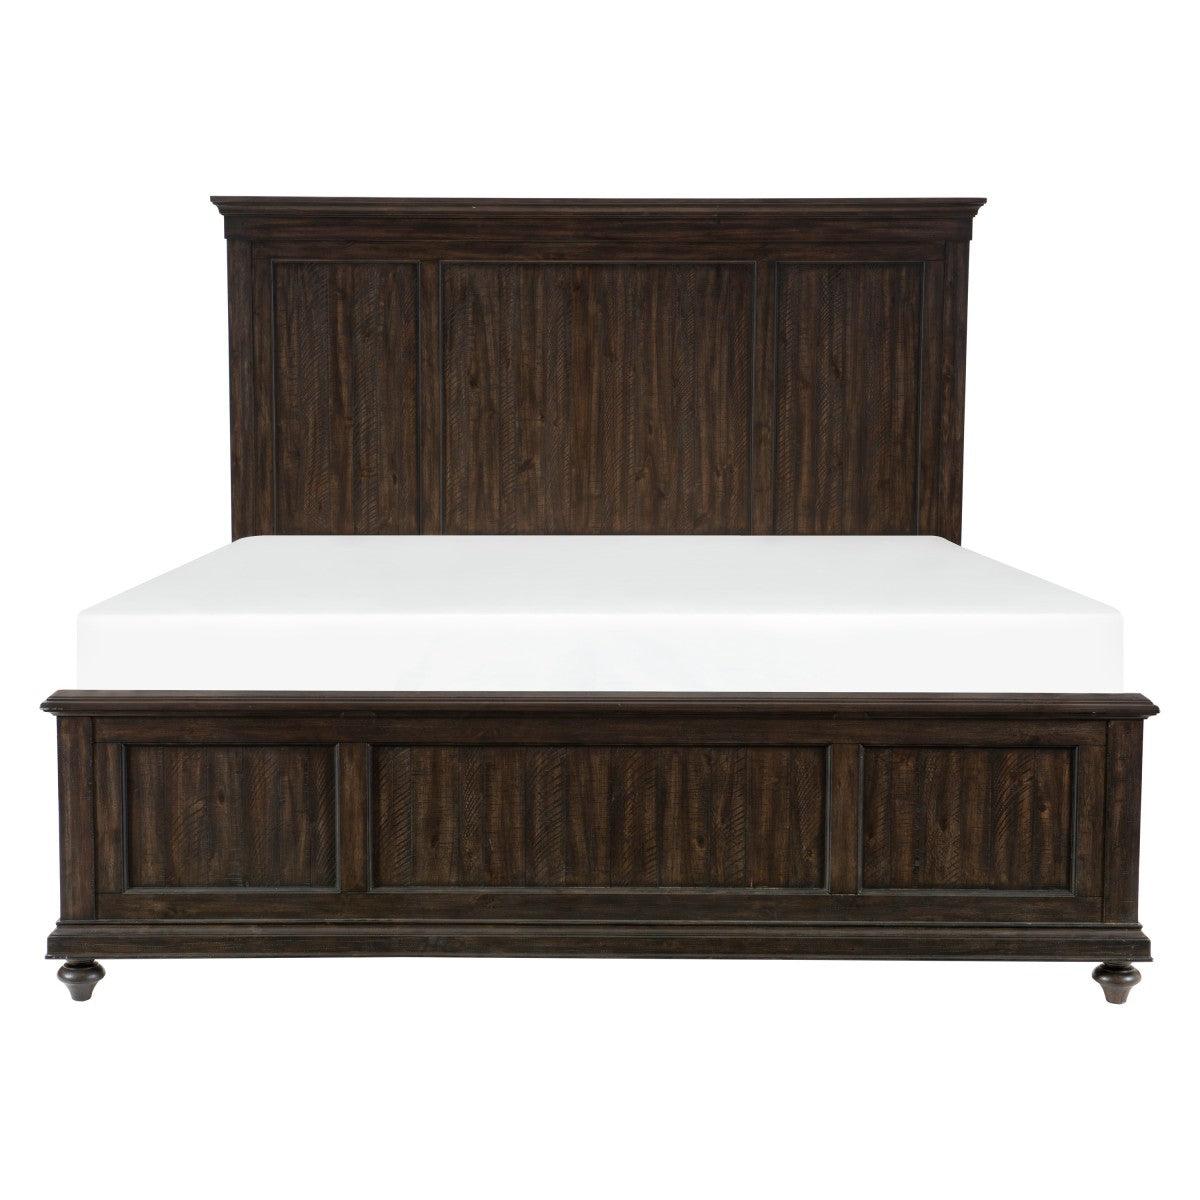 Cardano Driftwood Charcoal Transitional Acacia Veneer Wood And Engineered Wood Queen Panel Bed - Ella Furniture